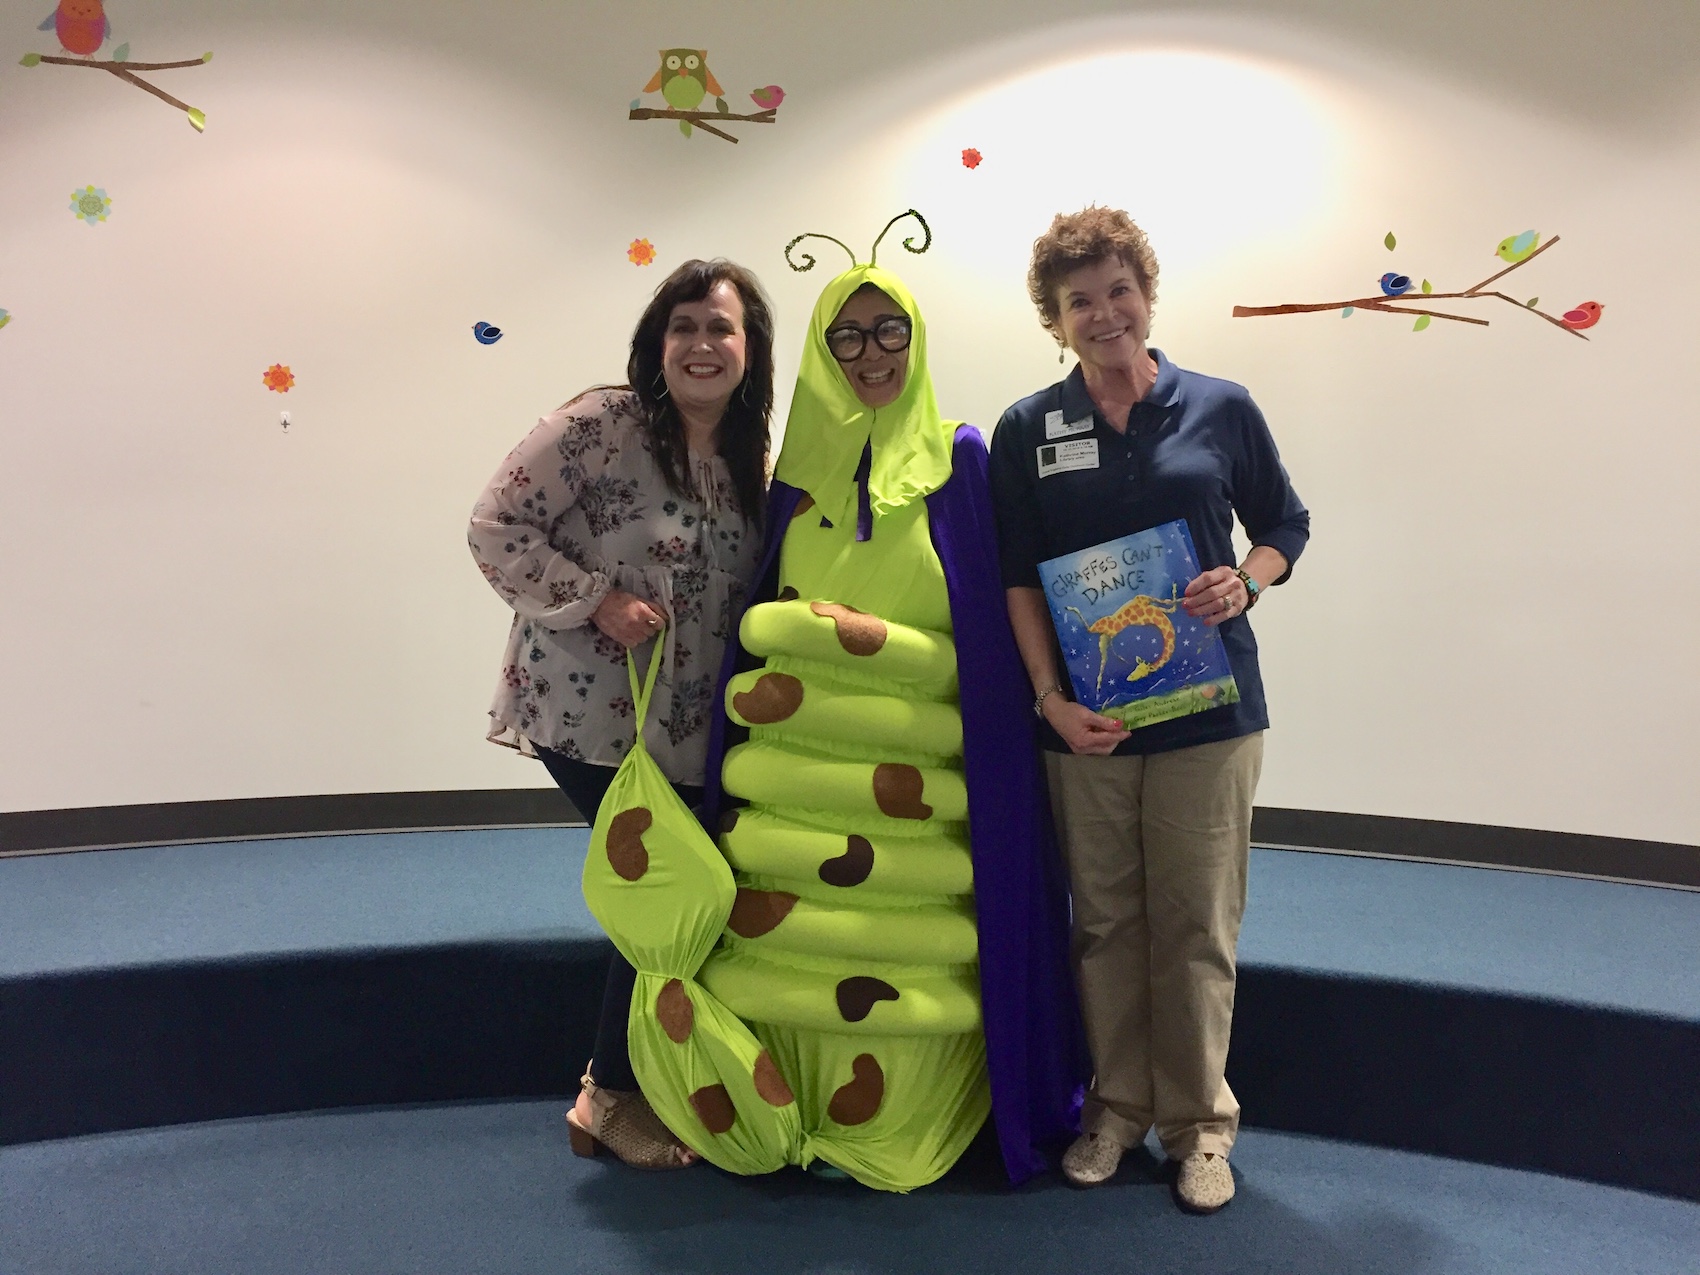 CWJF members pose during Baxter the Bookworm Event for preschoolers